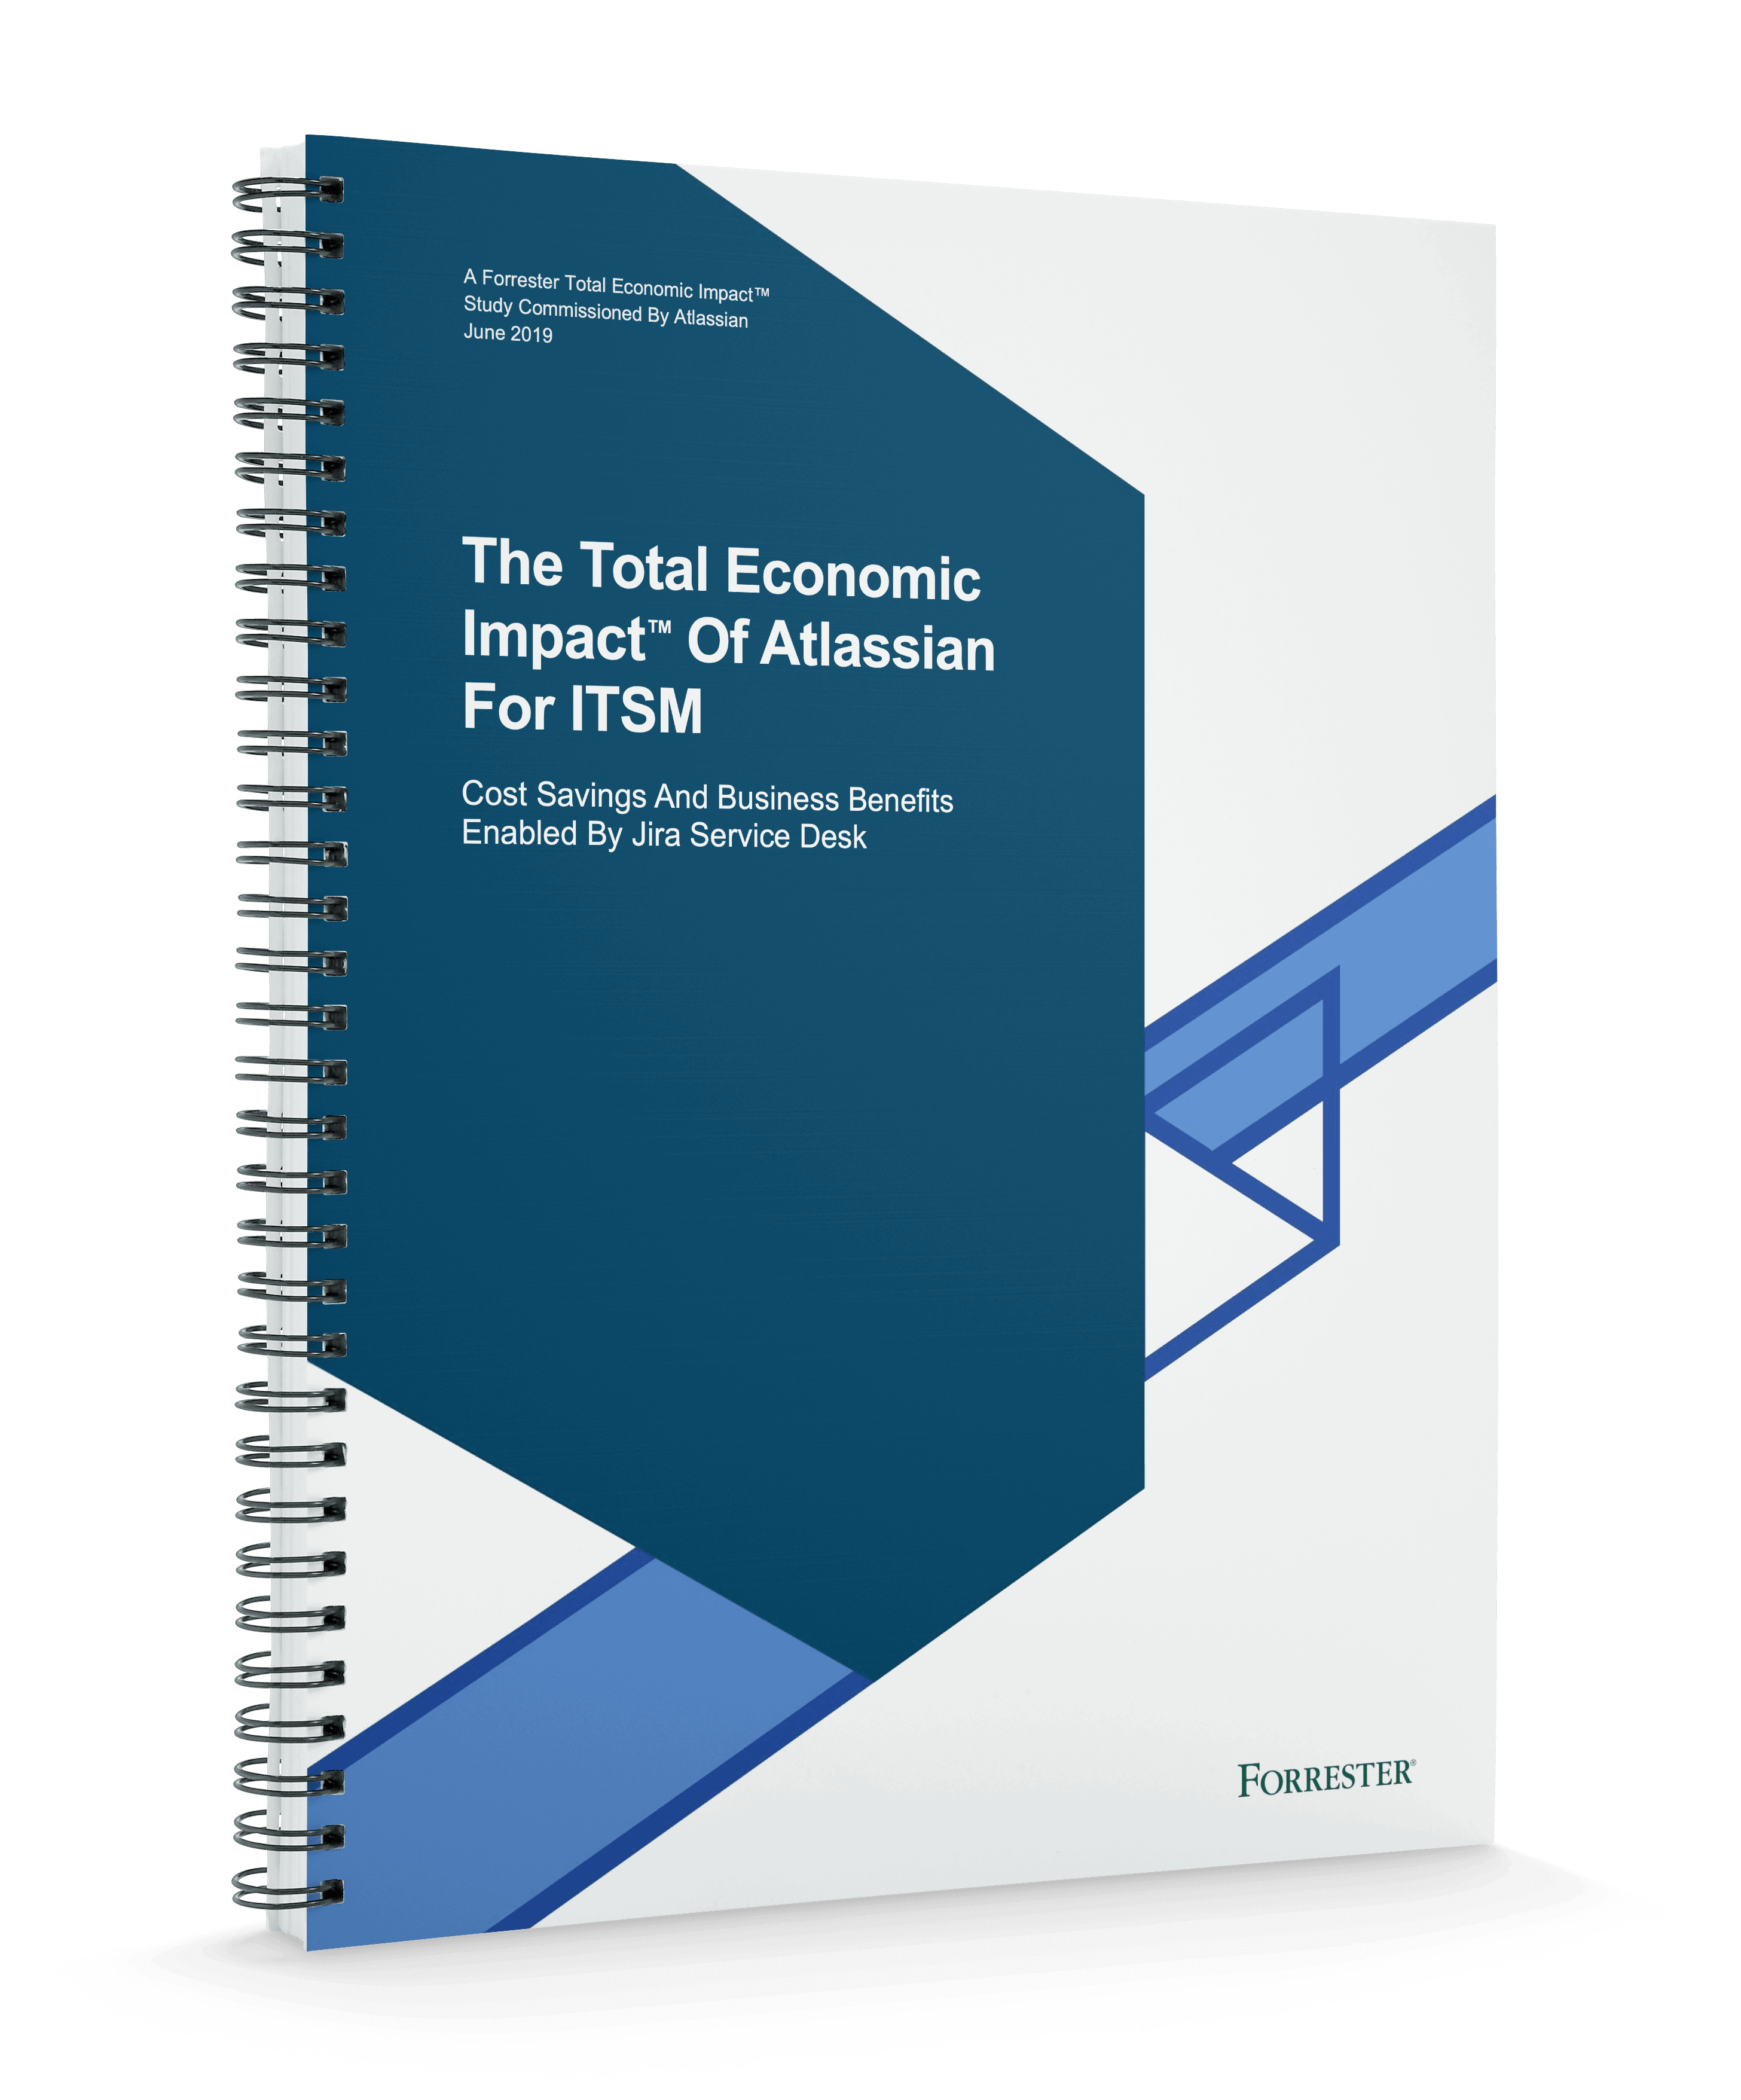 "The Total Economic Impact™ Of Atlassian For ITSM" di Forrester